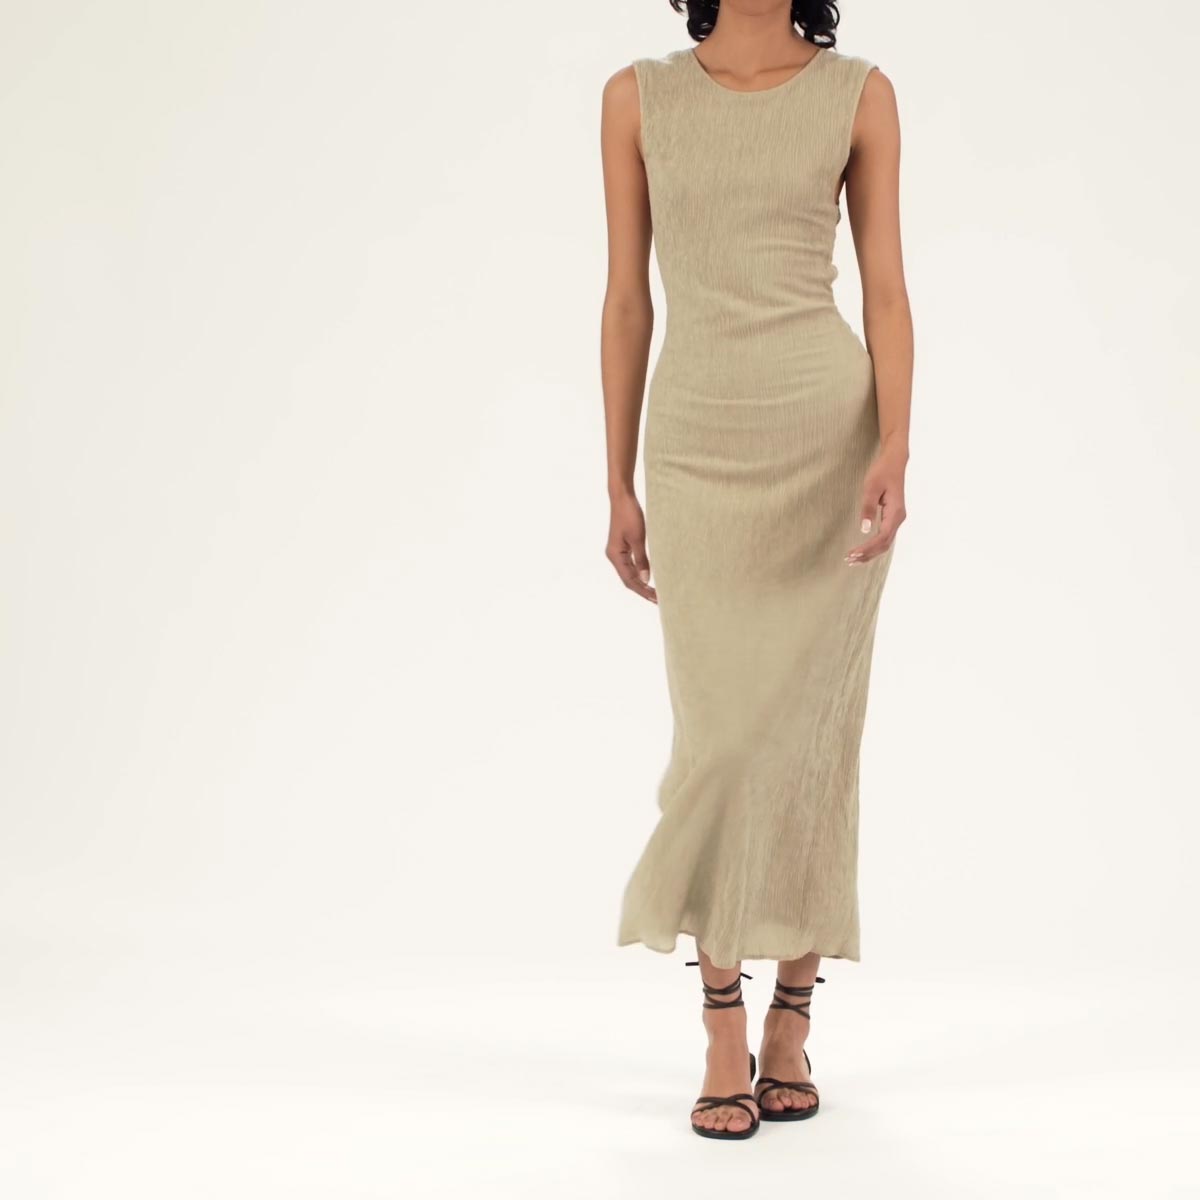 The Wrap Sandal in Black Nappa shown on model styled with a beige sleeveless midi dress.